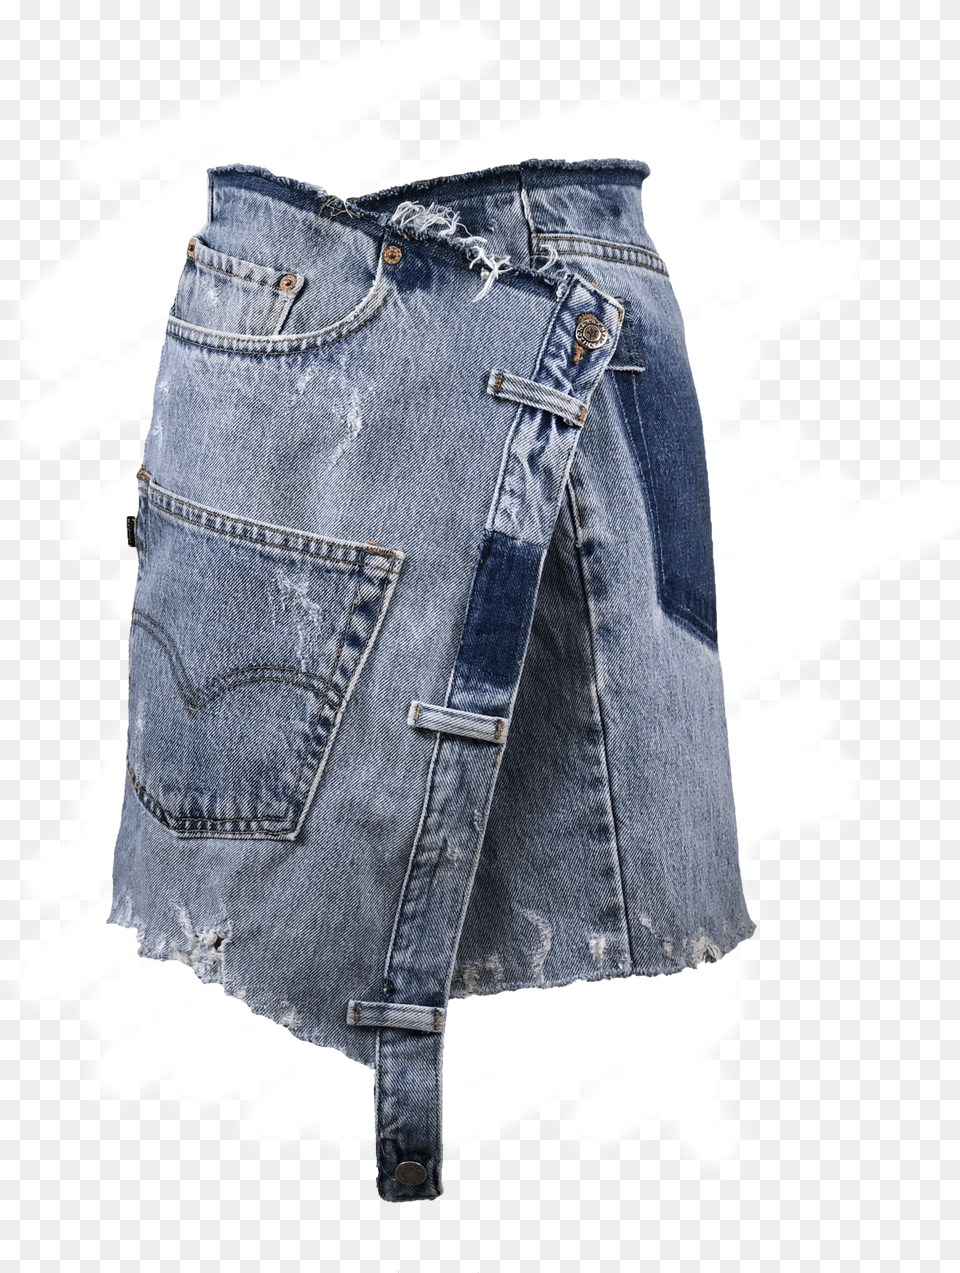 The Denim Skirtclass Lazyload Lazyload Fade In Cloudzoom Png